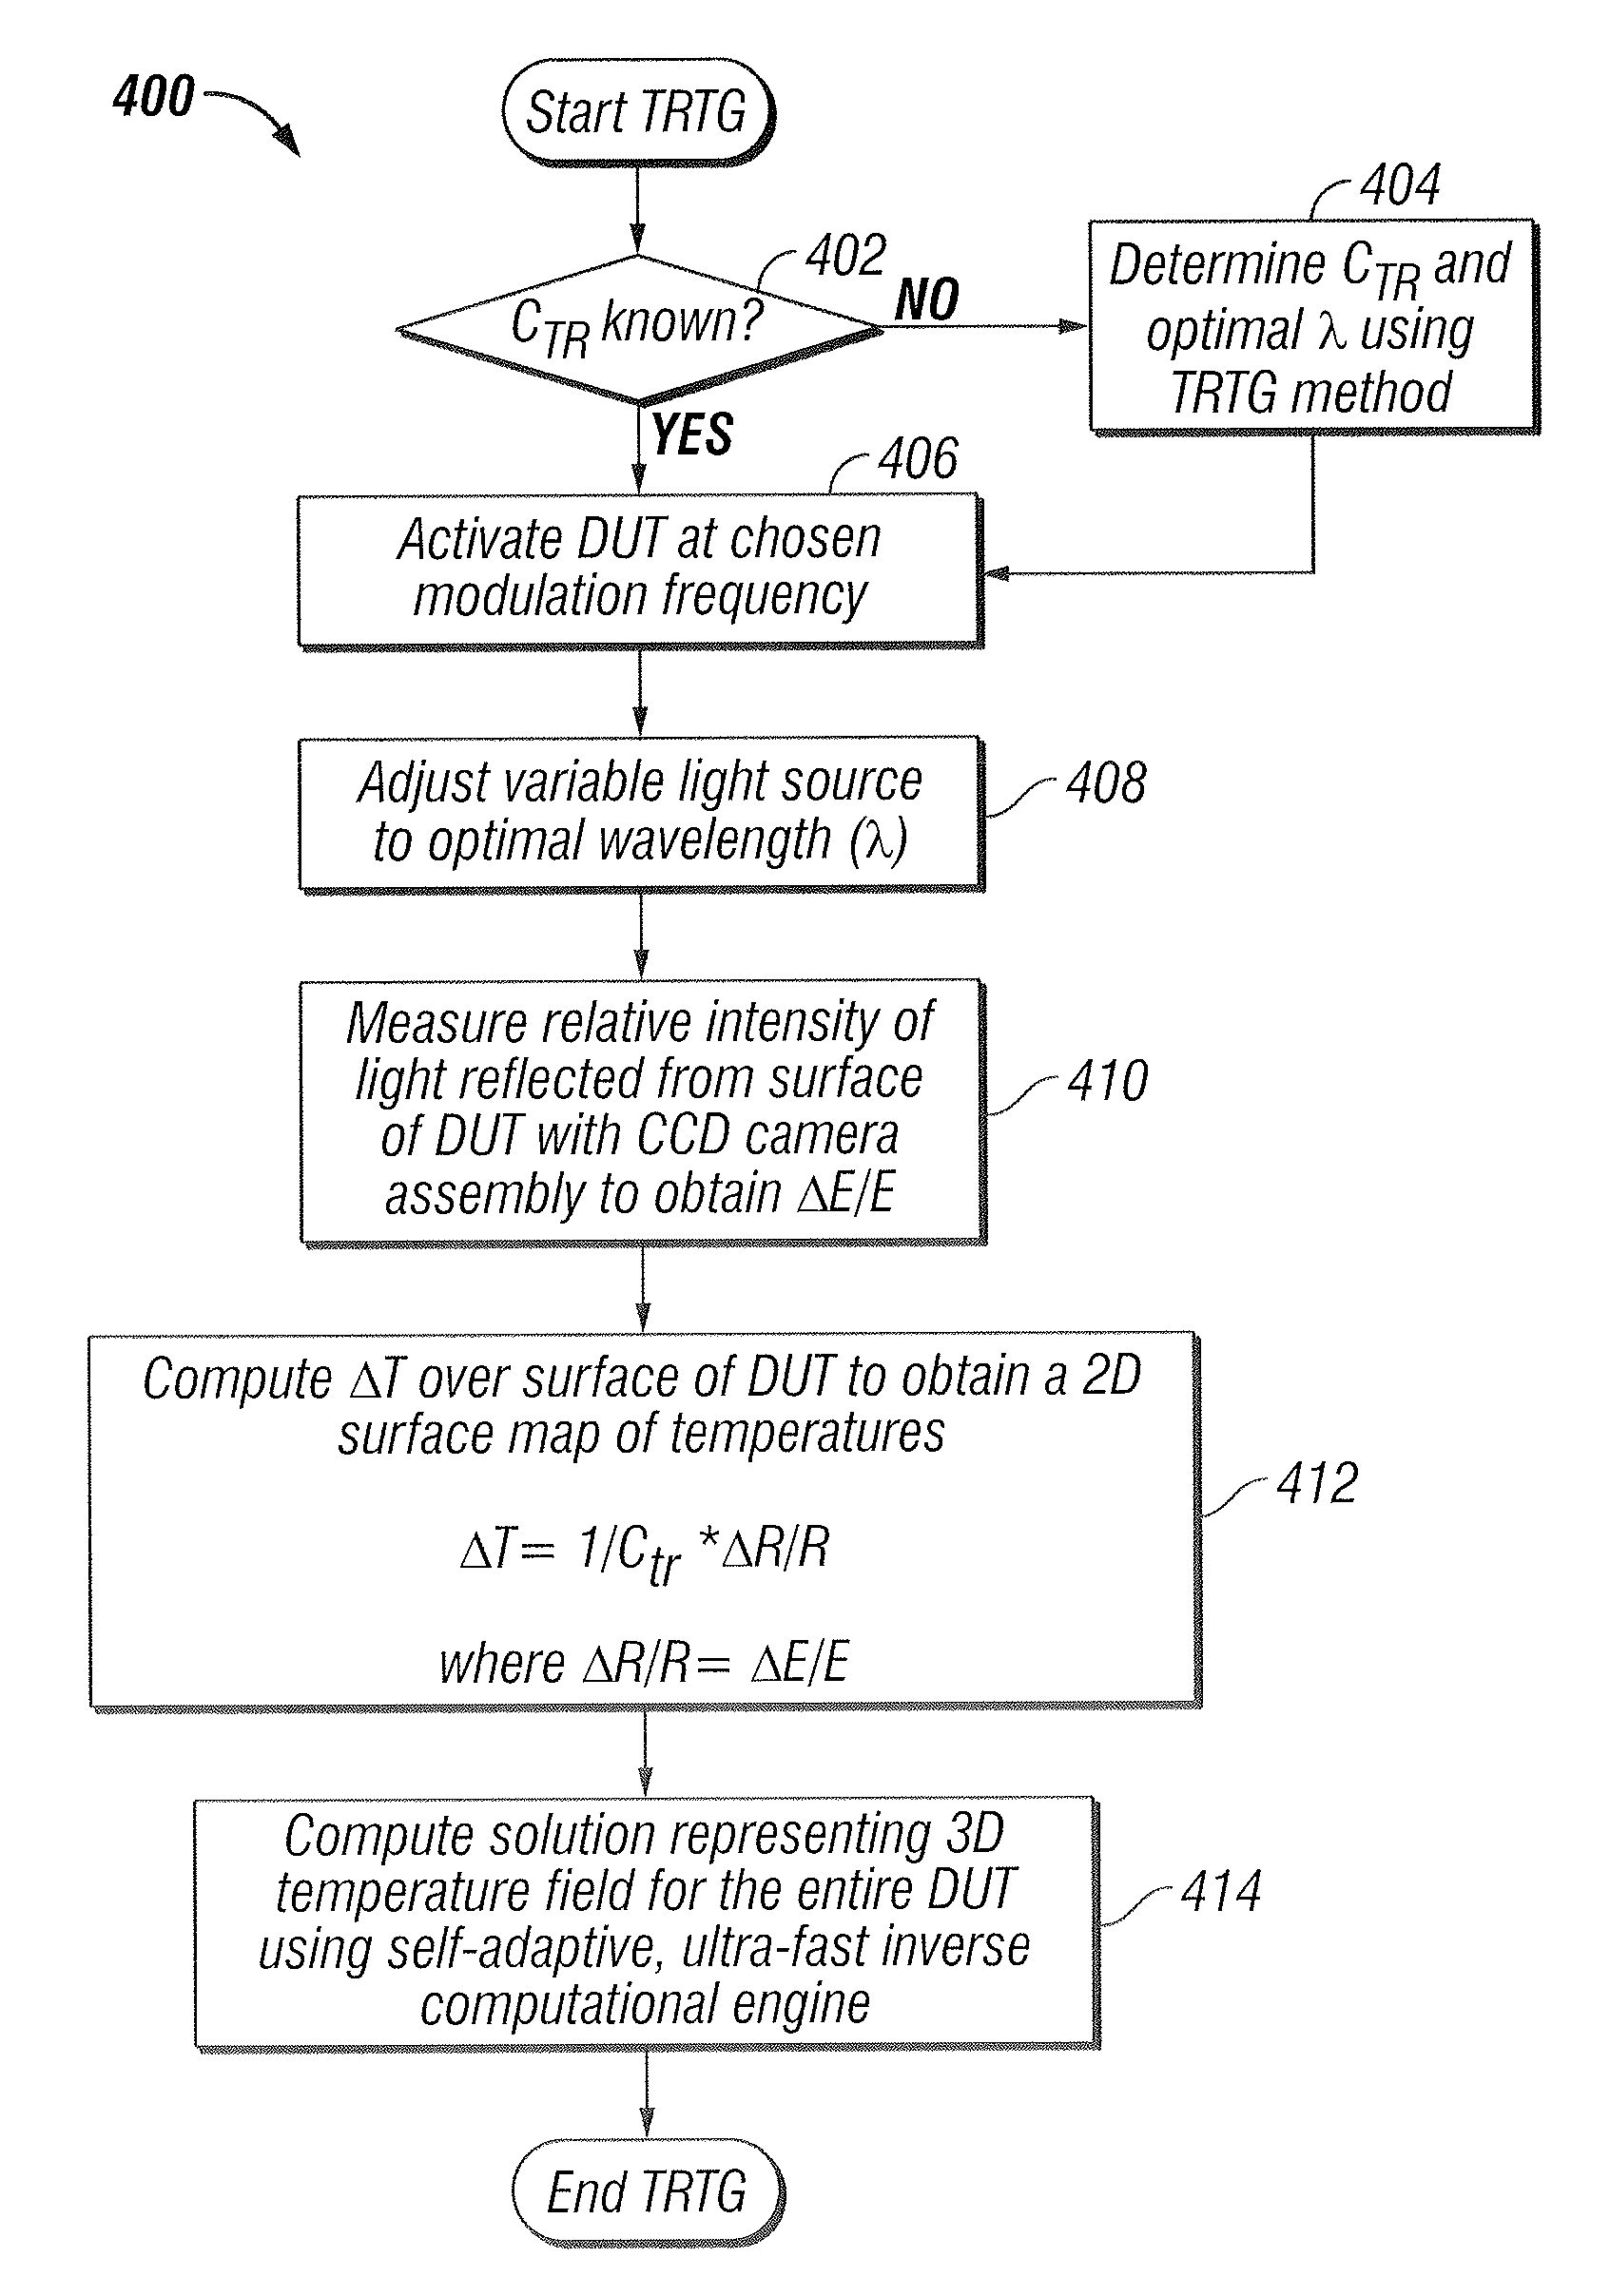 Thermography measurement system for conducting thermal characterization of integrated circuits